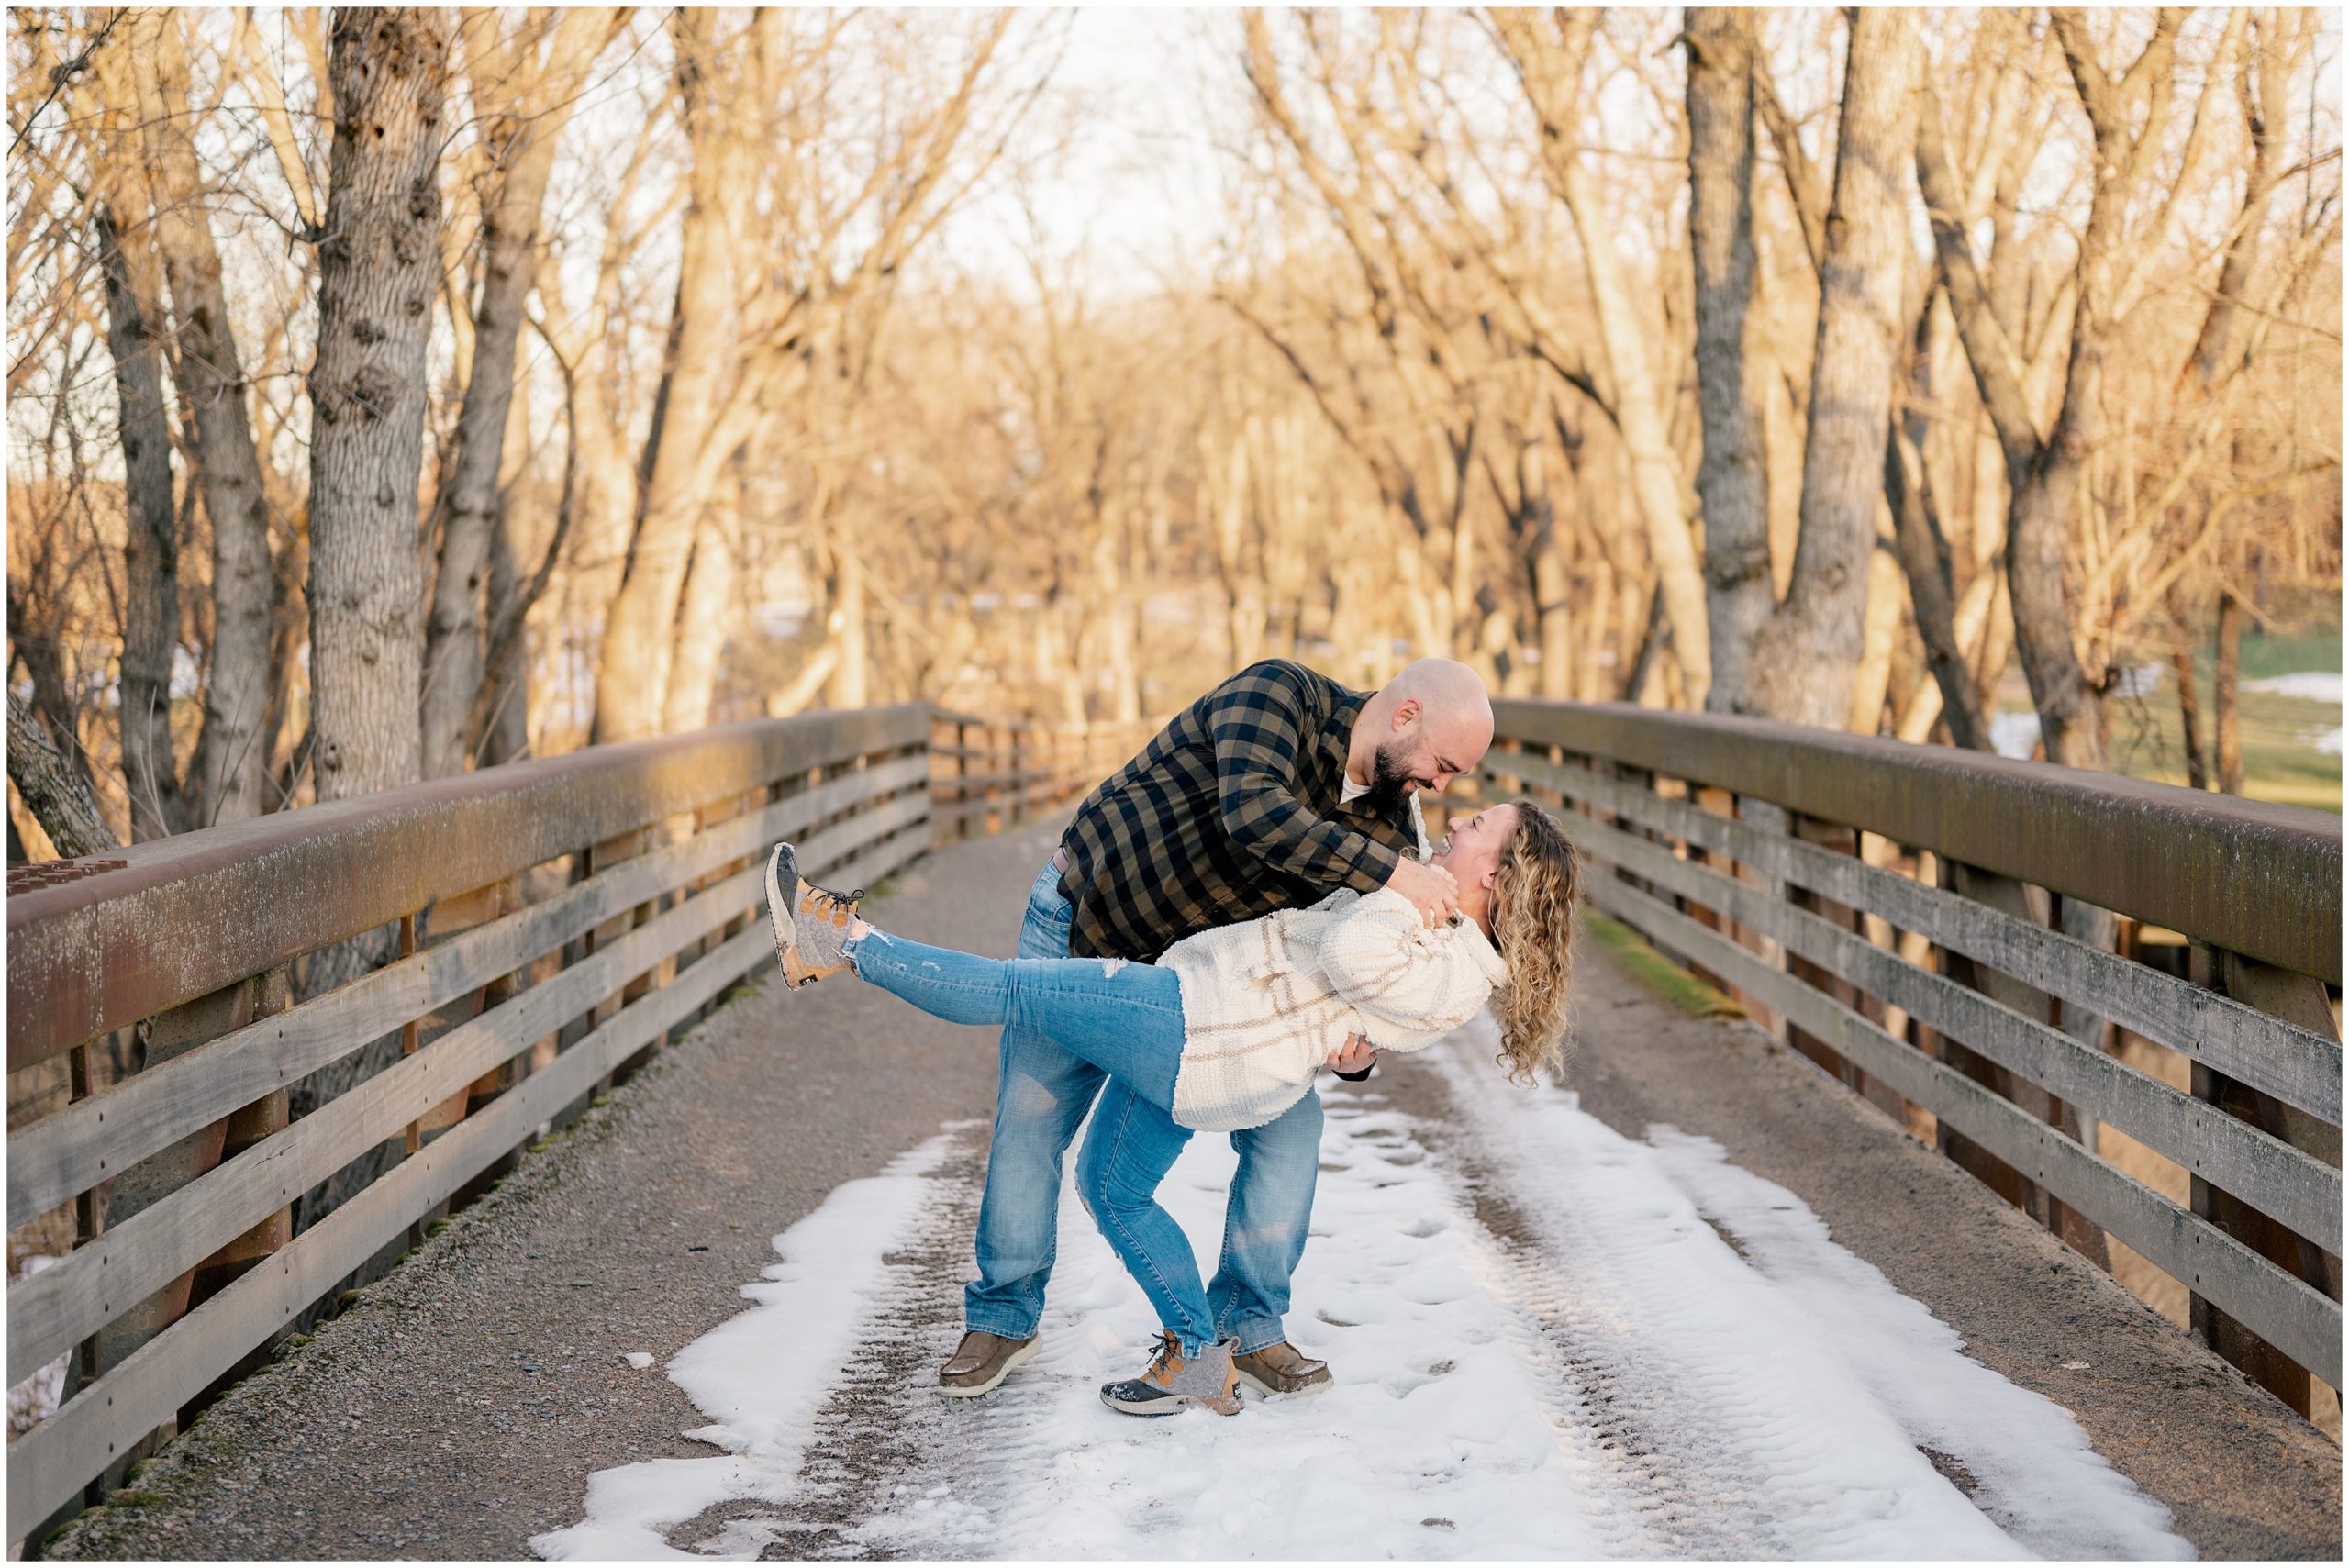 This engagement session was one for the books!